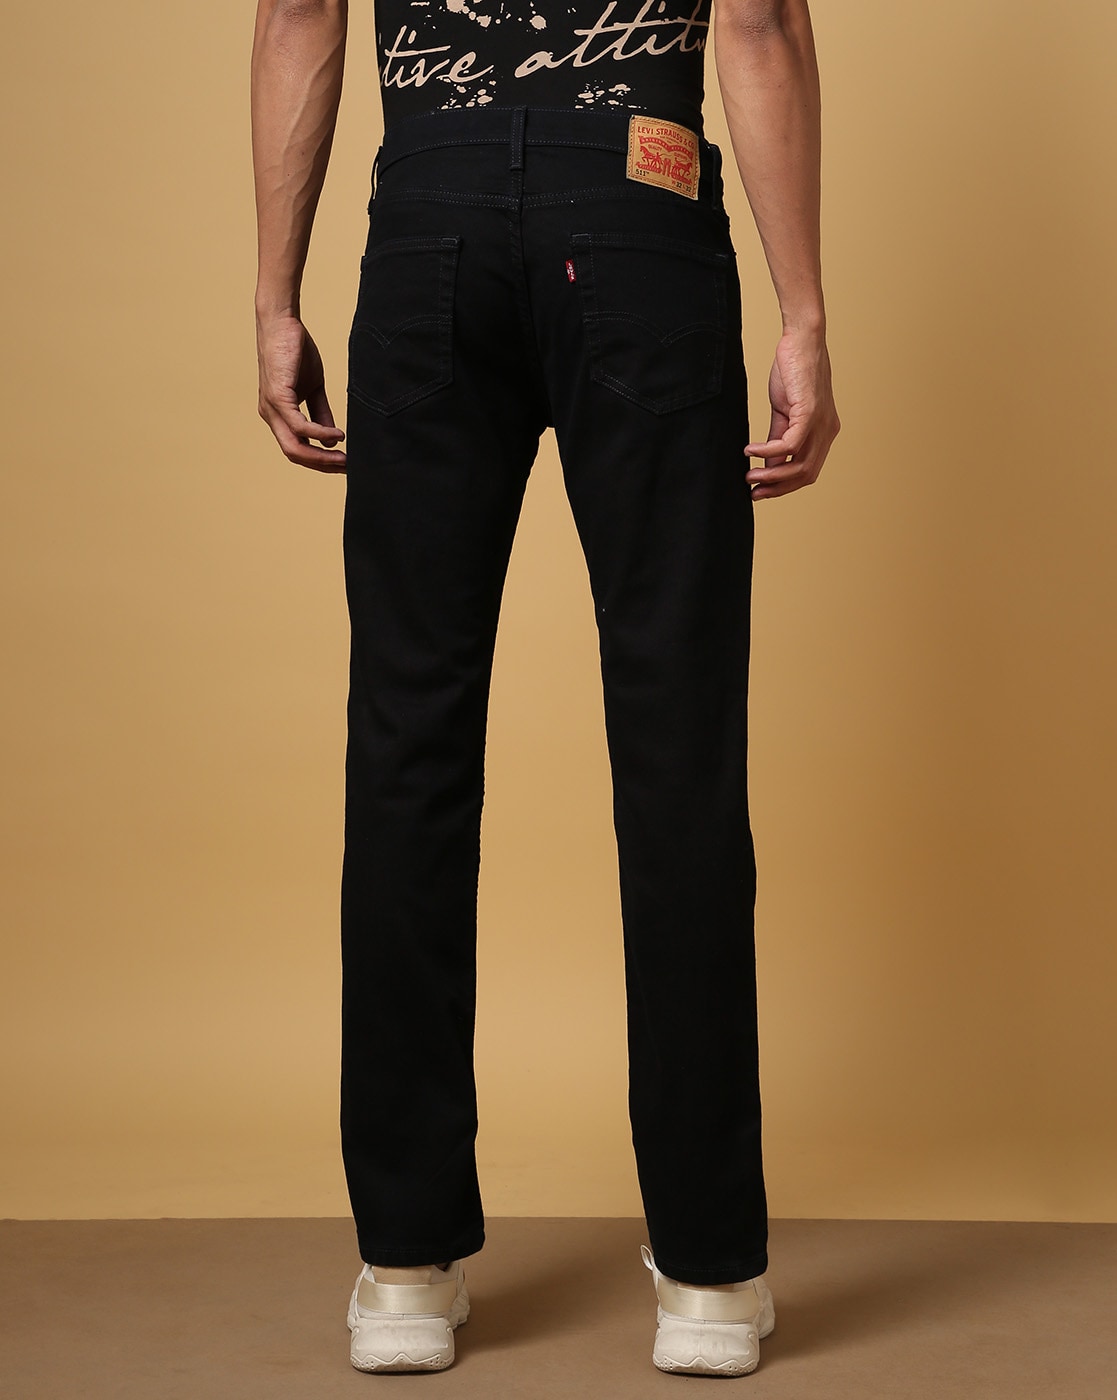 Buy Black Jeans for by LEVIS Online | Ajio.com